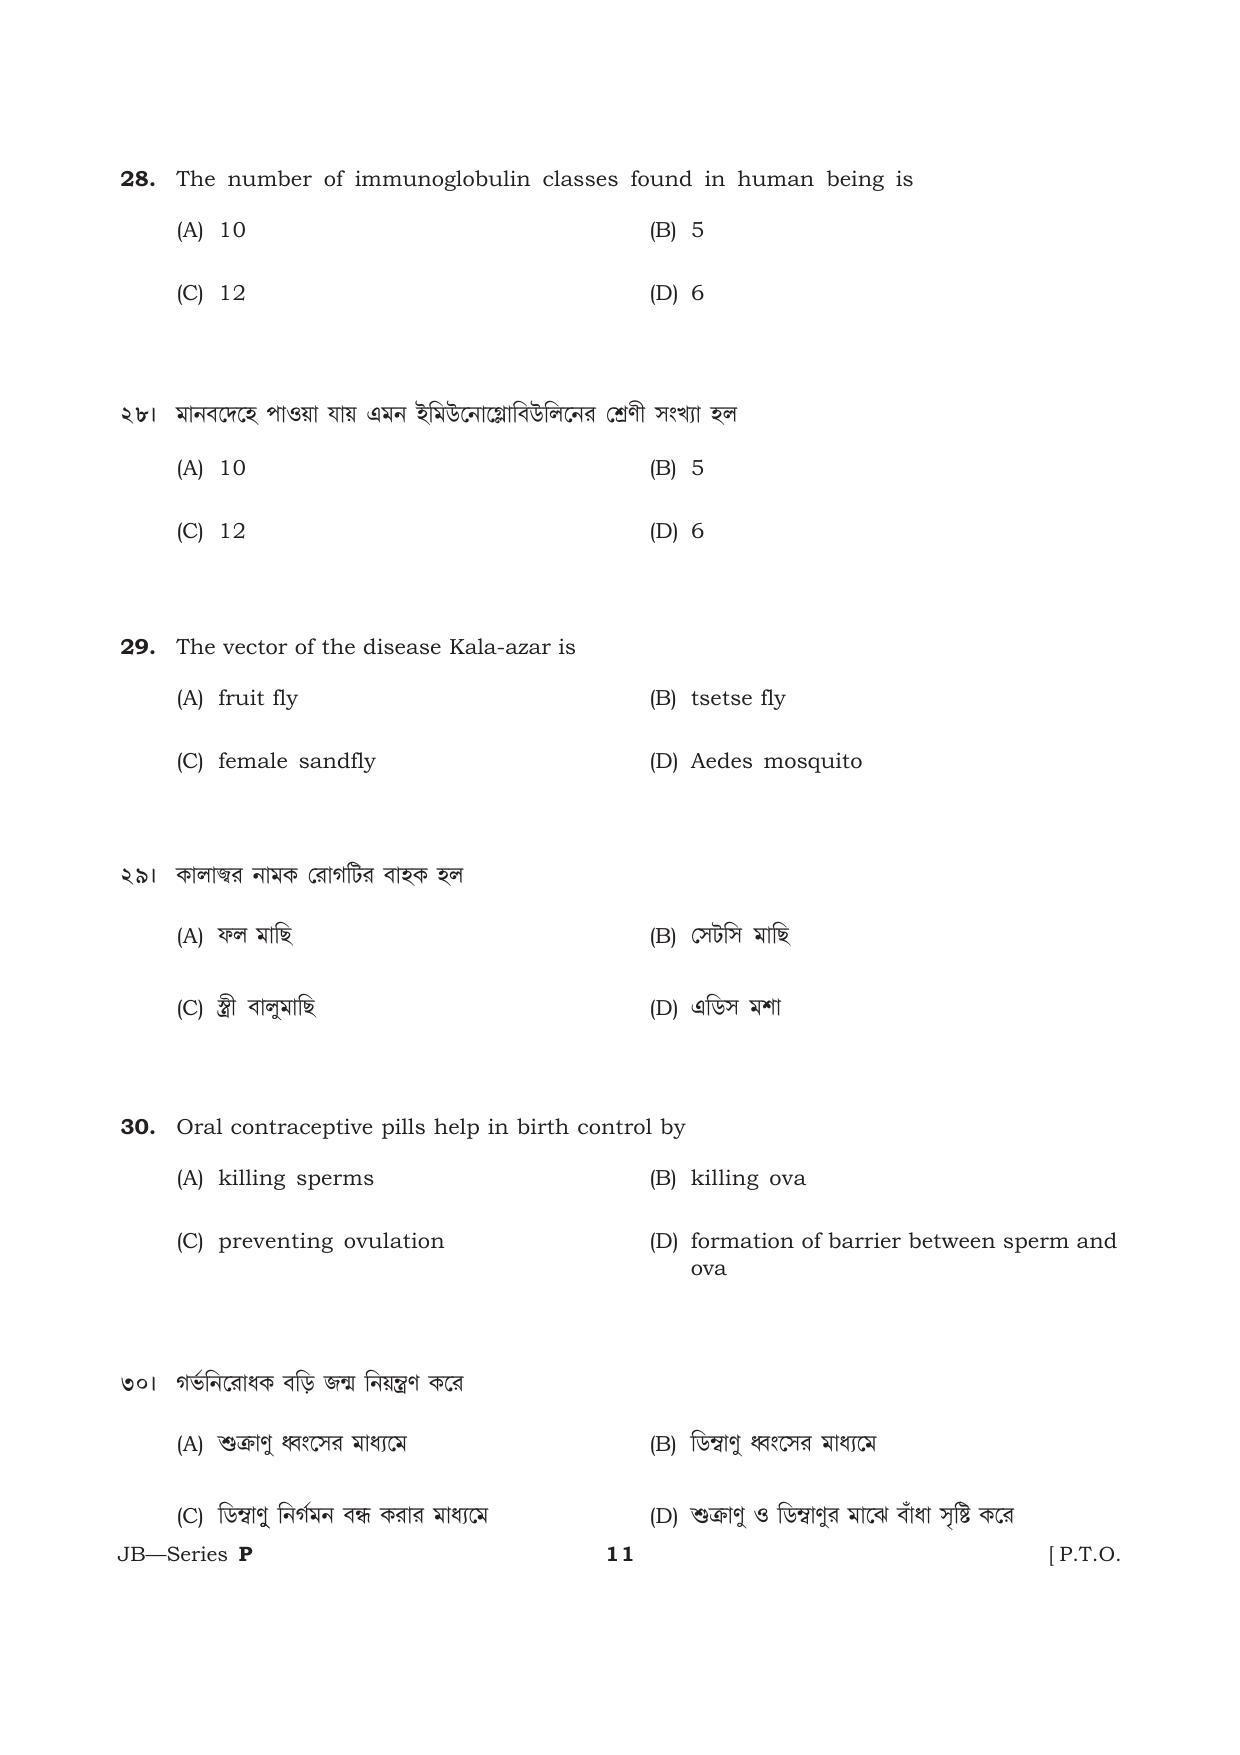 TBJEE Question Paper 2021 - Biology - Page 11